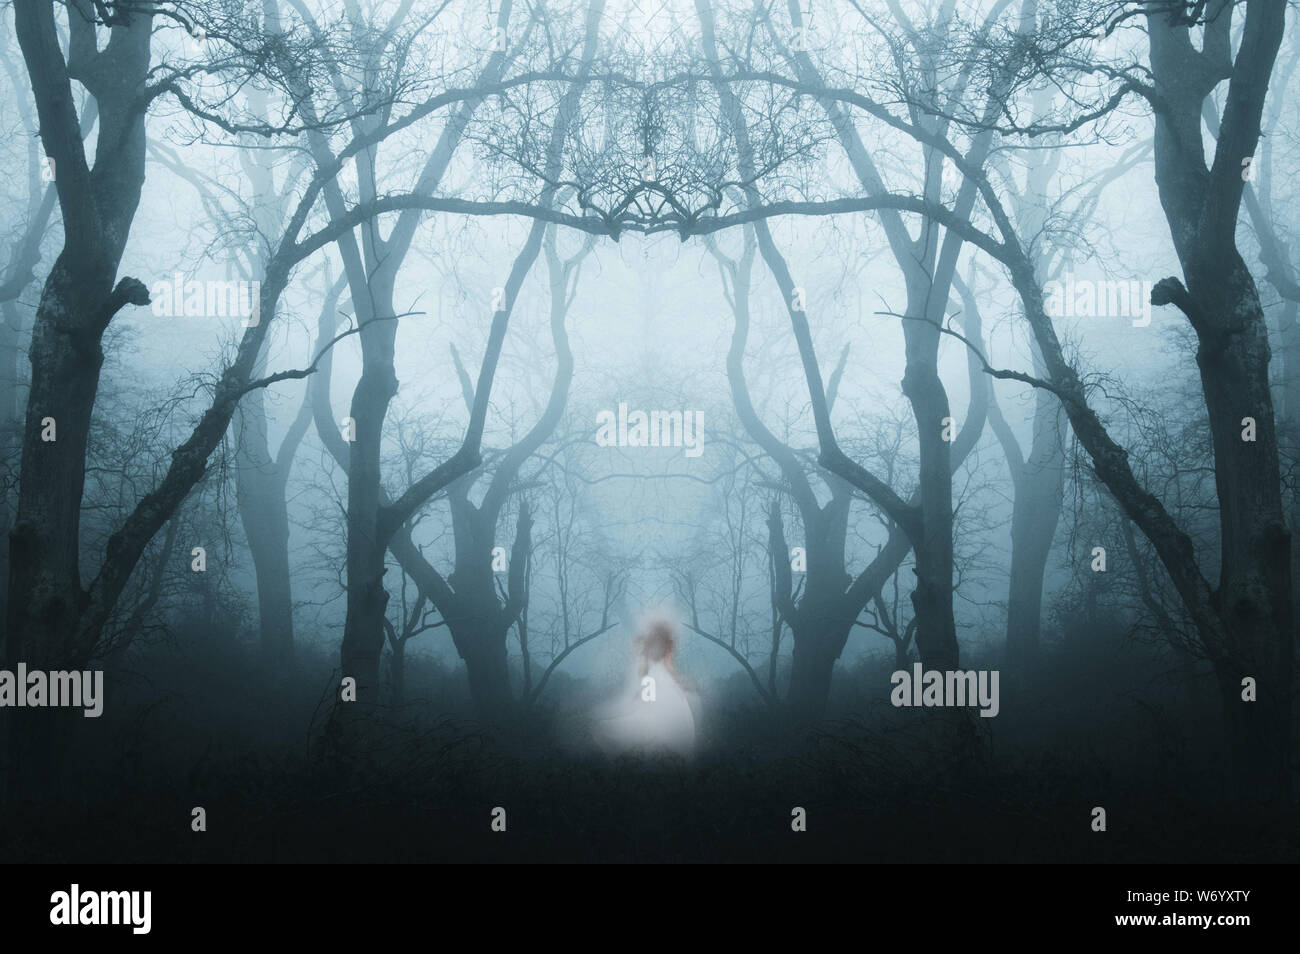 A mirrored, duplicate effect of a spooky, eerie forest in winter, with the trees silhouetted by fog. With a ghostly woman in white. Stock Photo